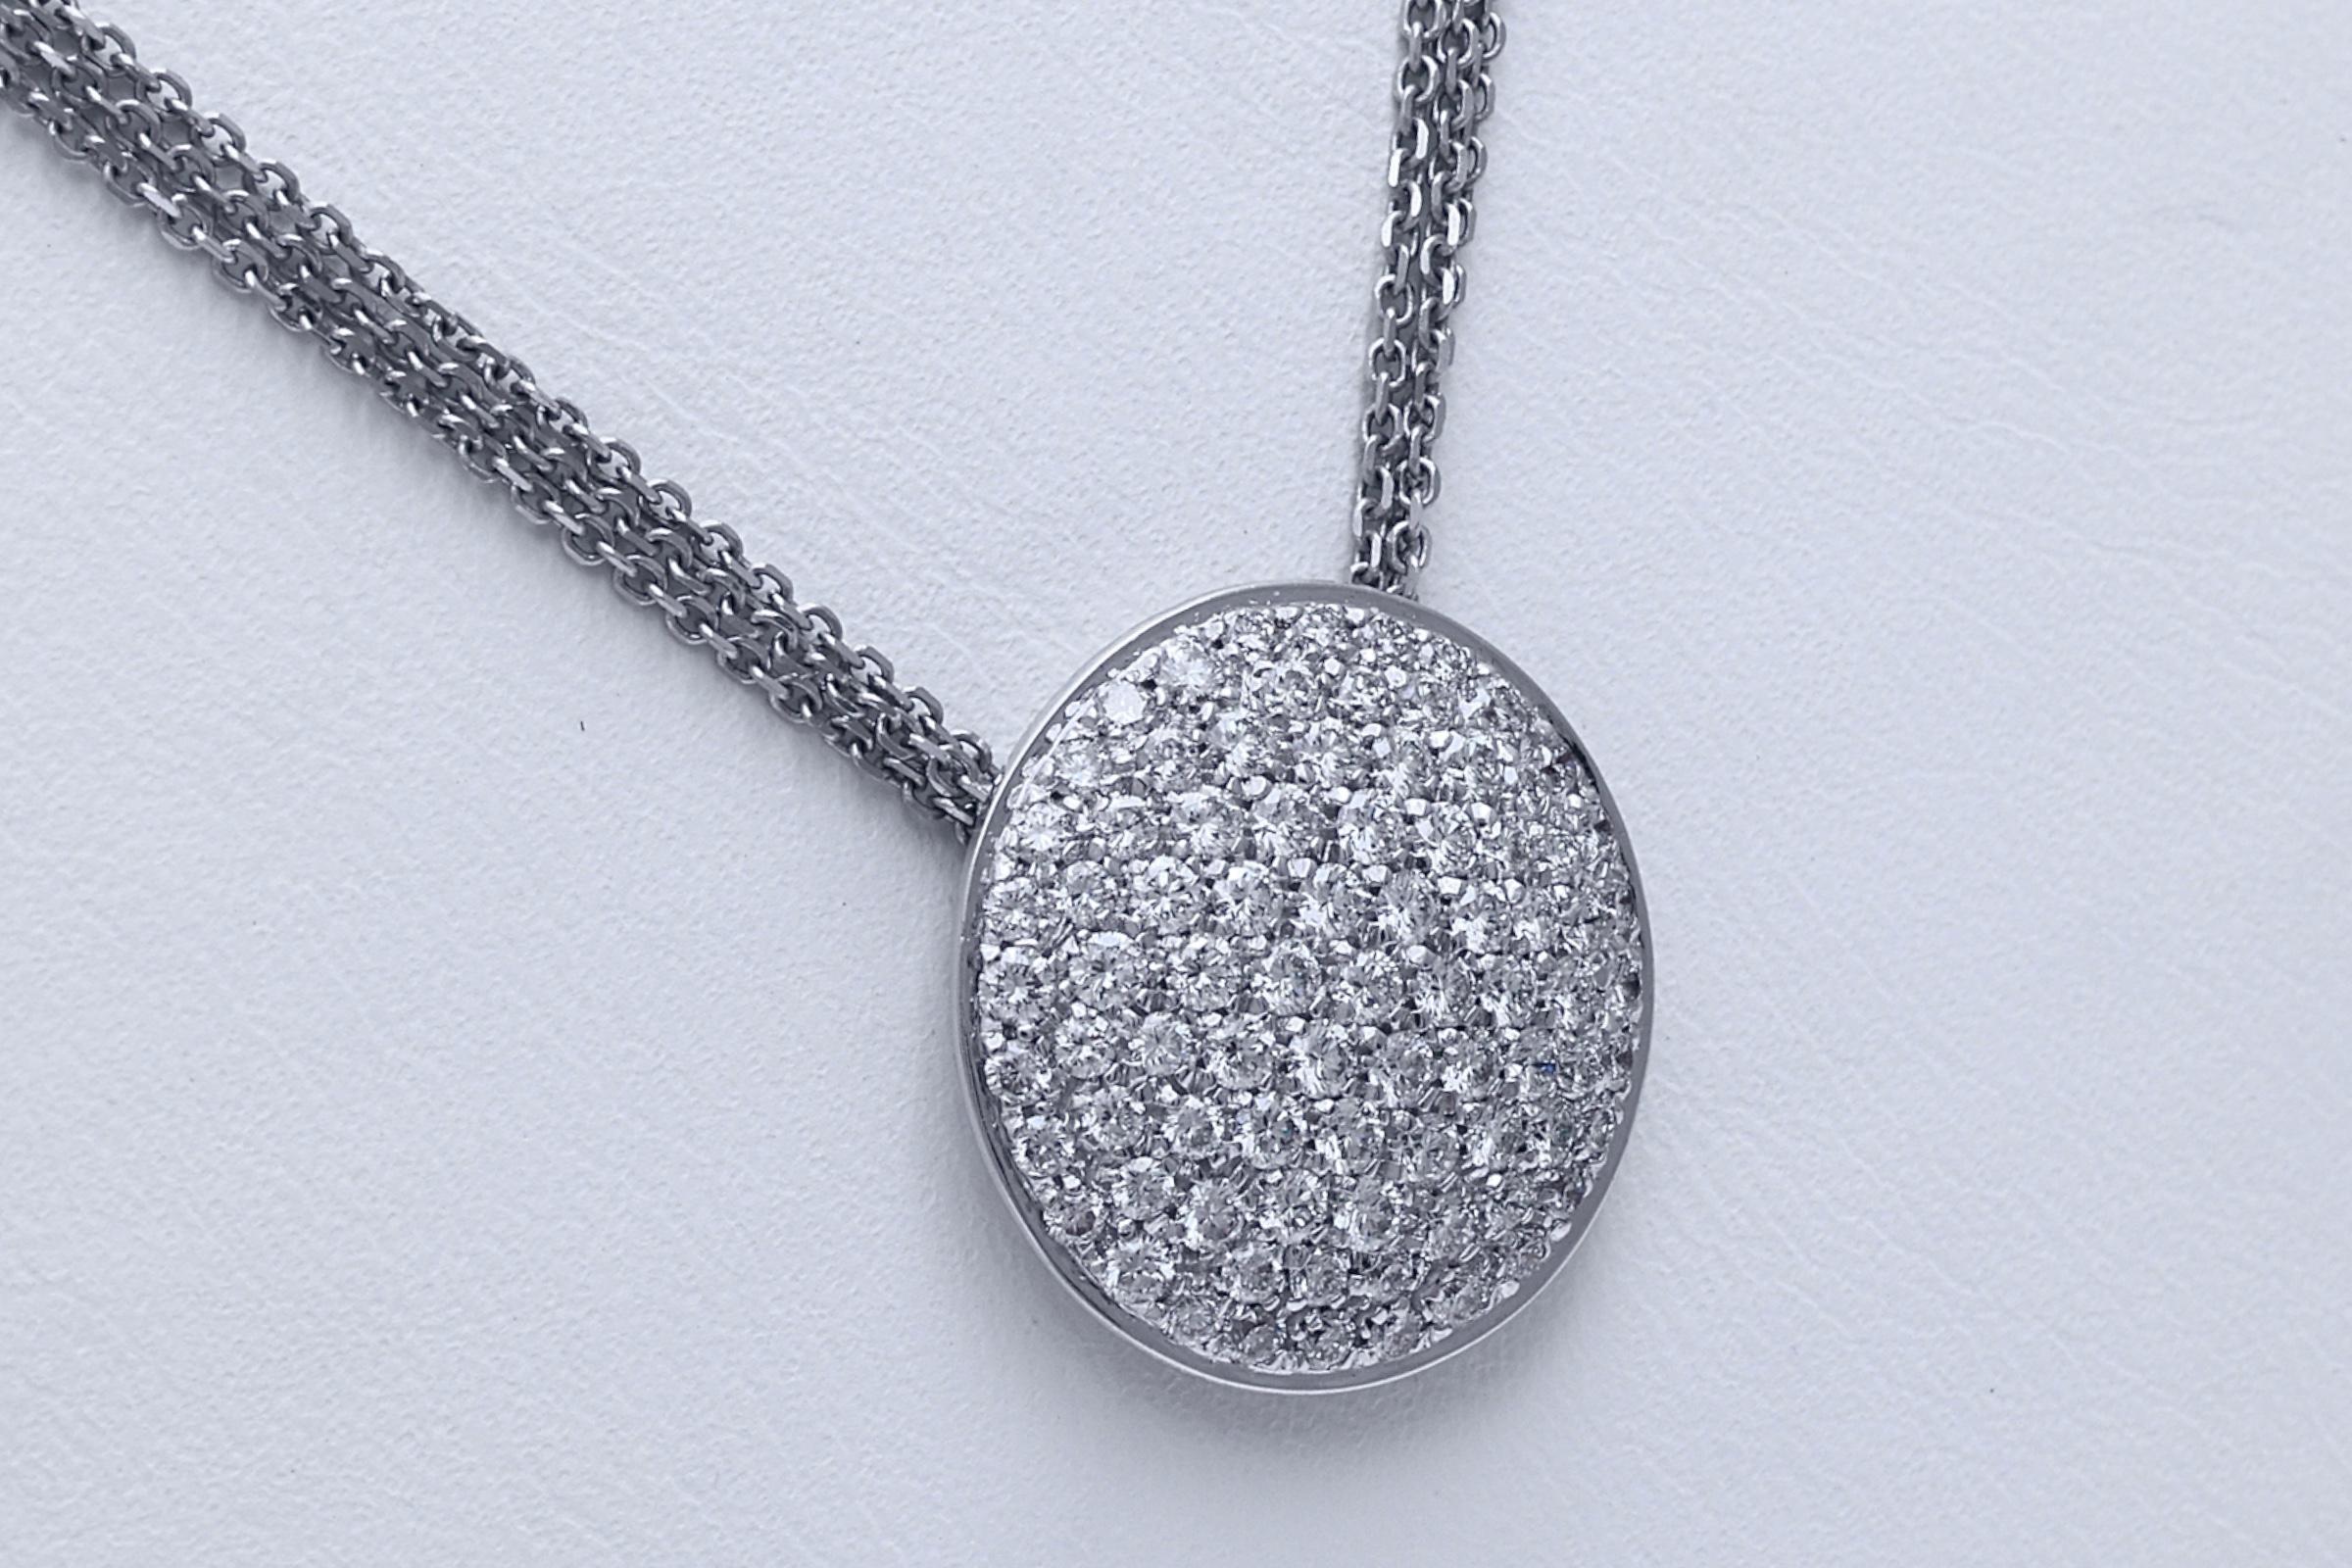 18 kt. White Gold Hulchi Belluni Reversible Necklace With Diamonds, Can Be Purchased With Matching Ring

Necklace can be worn 2 sided. has pave diamonds on one side and other side diamonds and flowers engraving.

Can be bought with Matching Ring